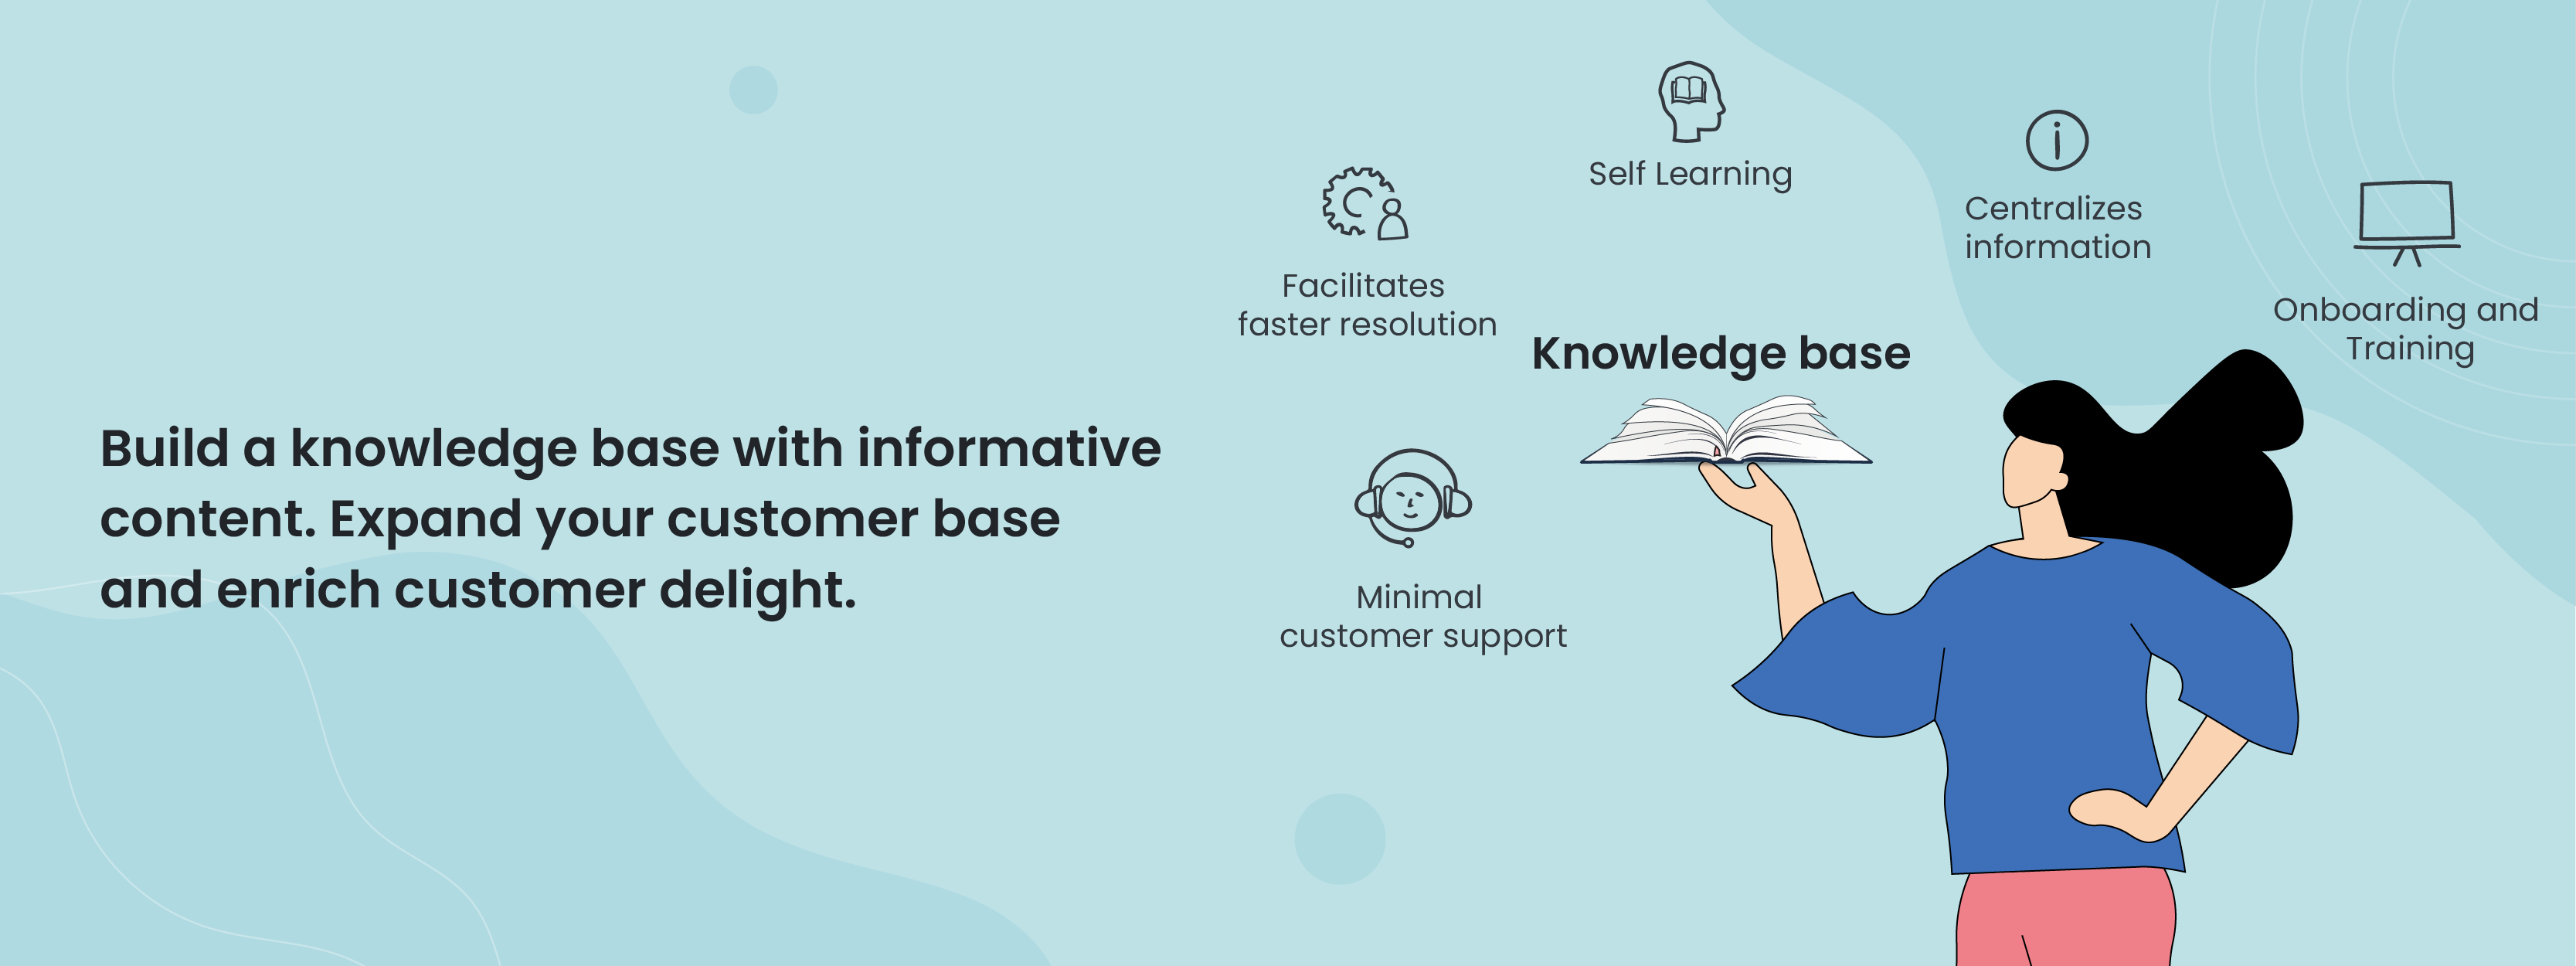 Benefits of knowledge base